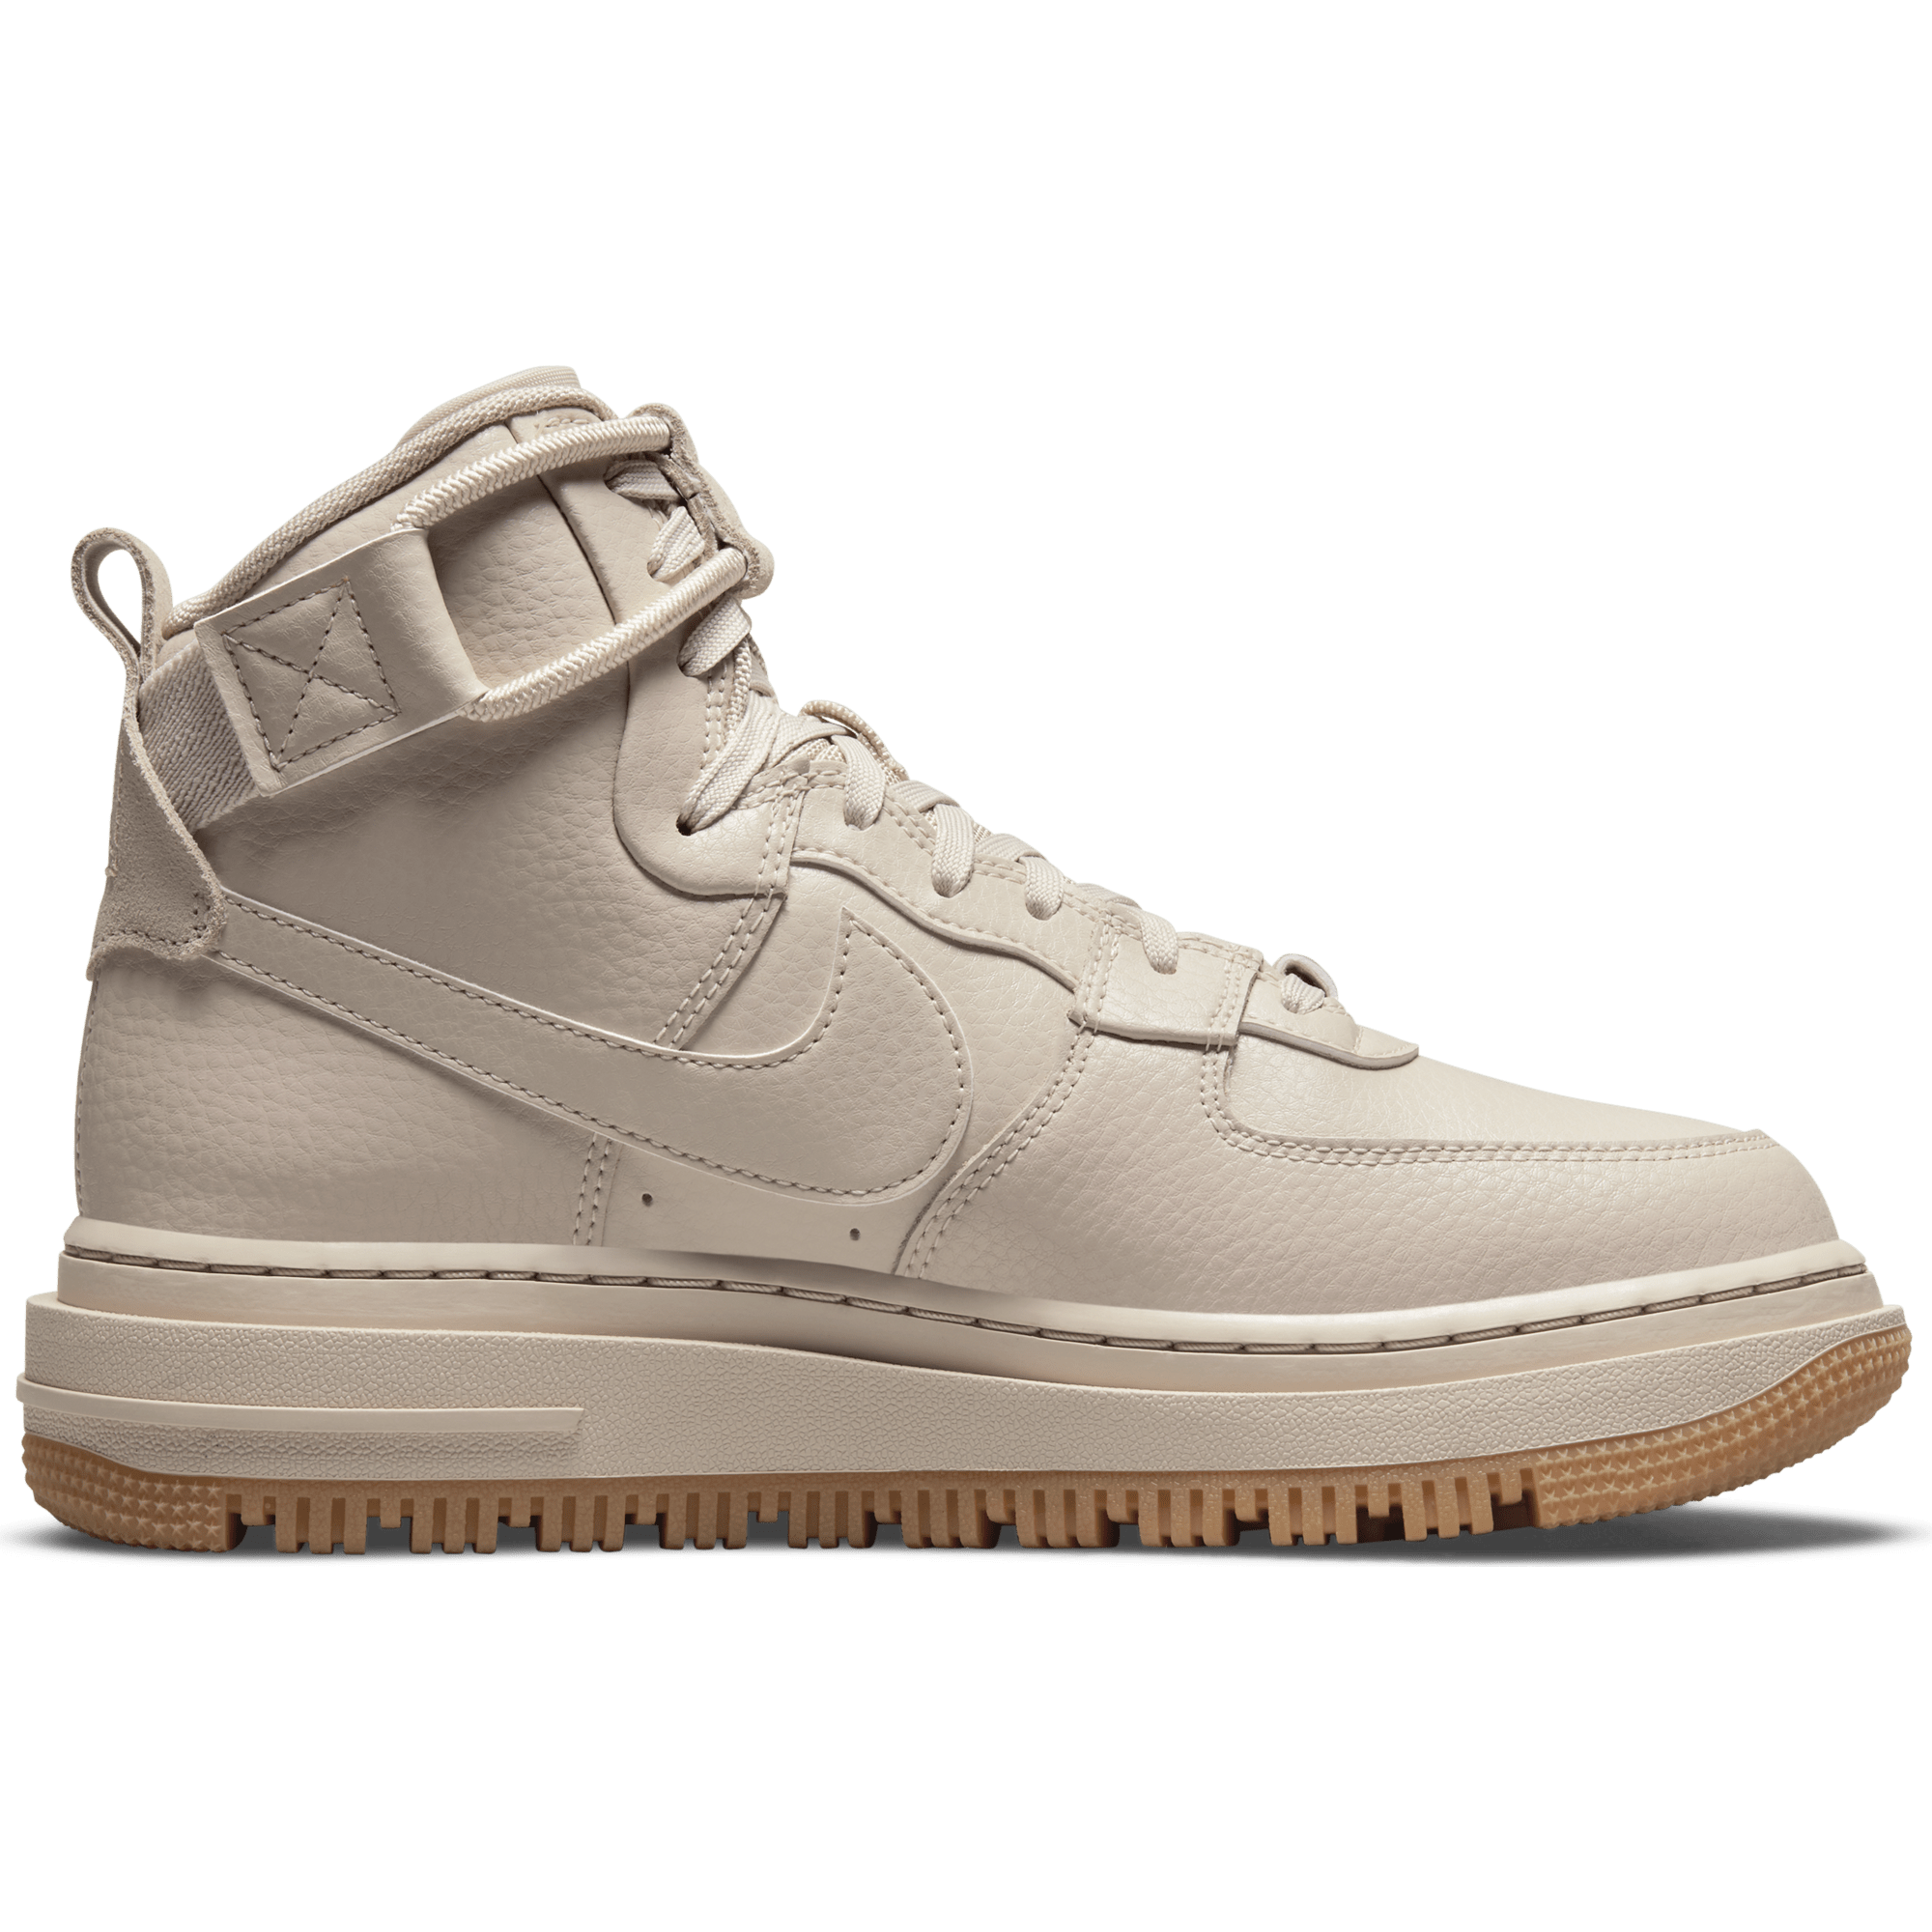 Nike Air Force 1 High Utility 2.0 Suede And Textured-leather